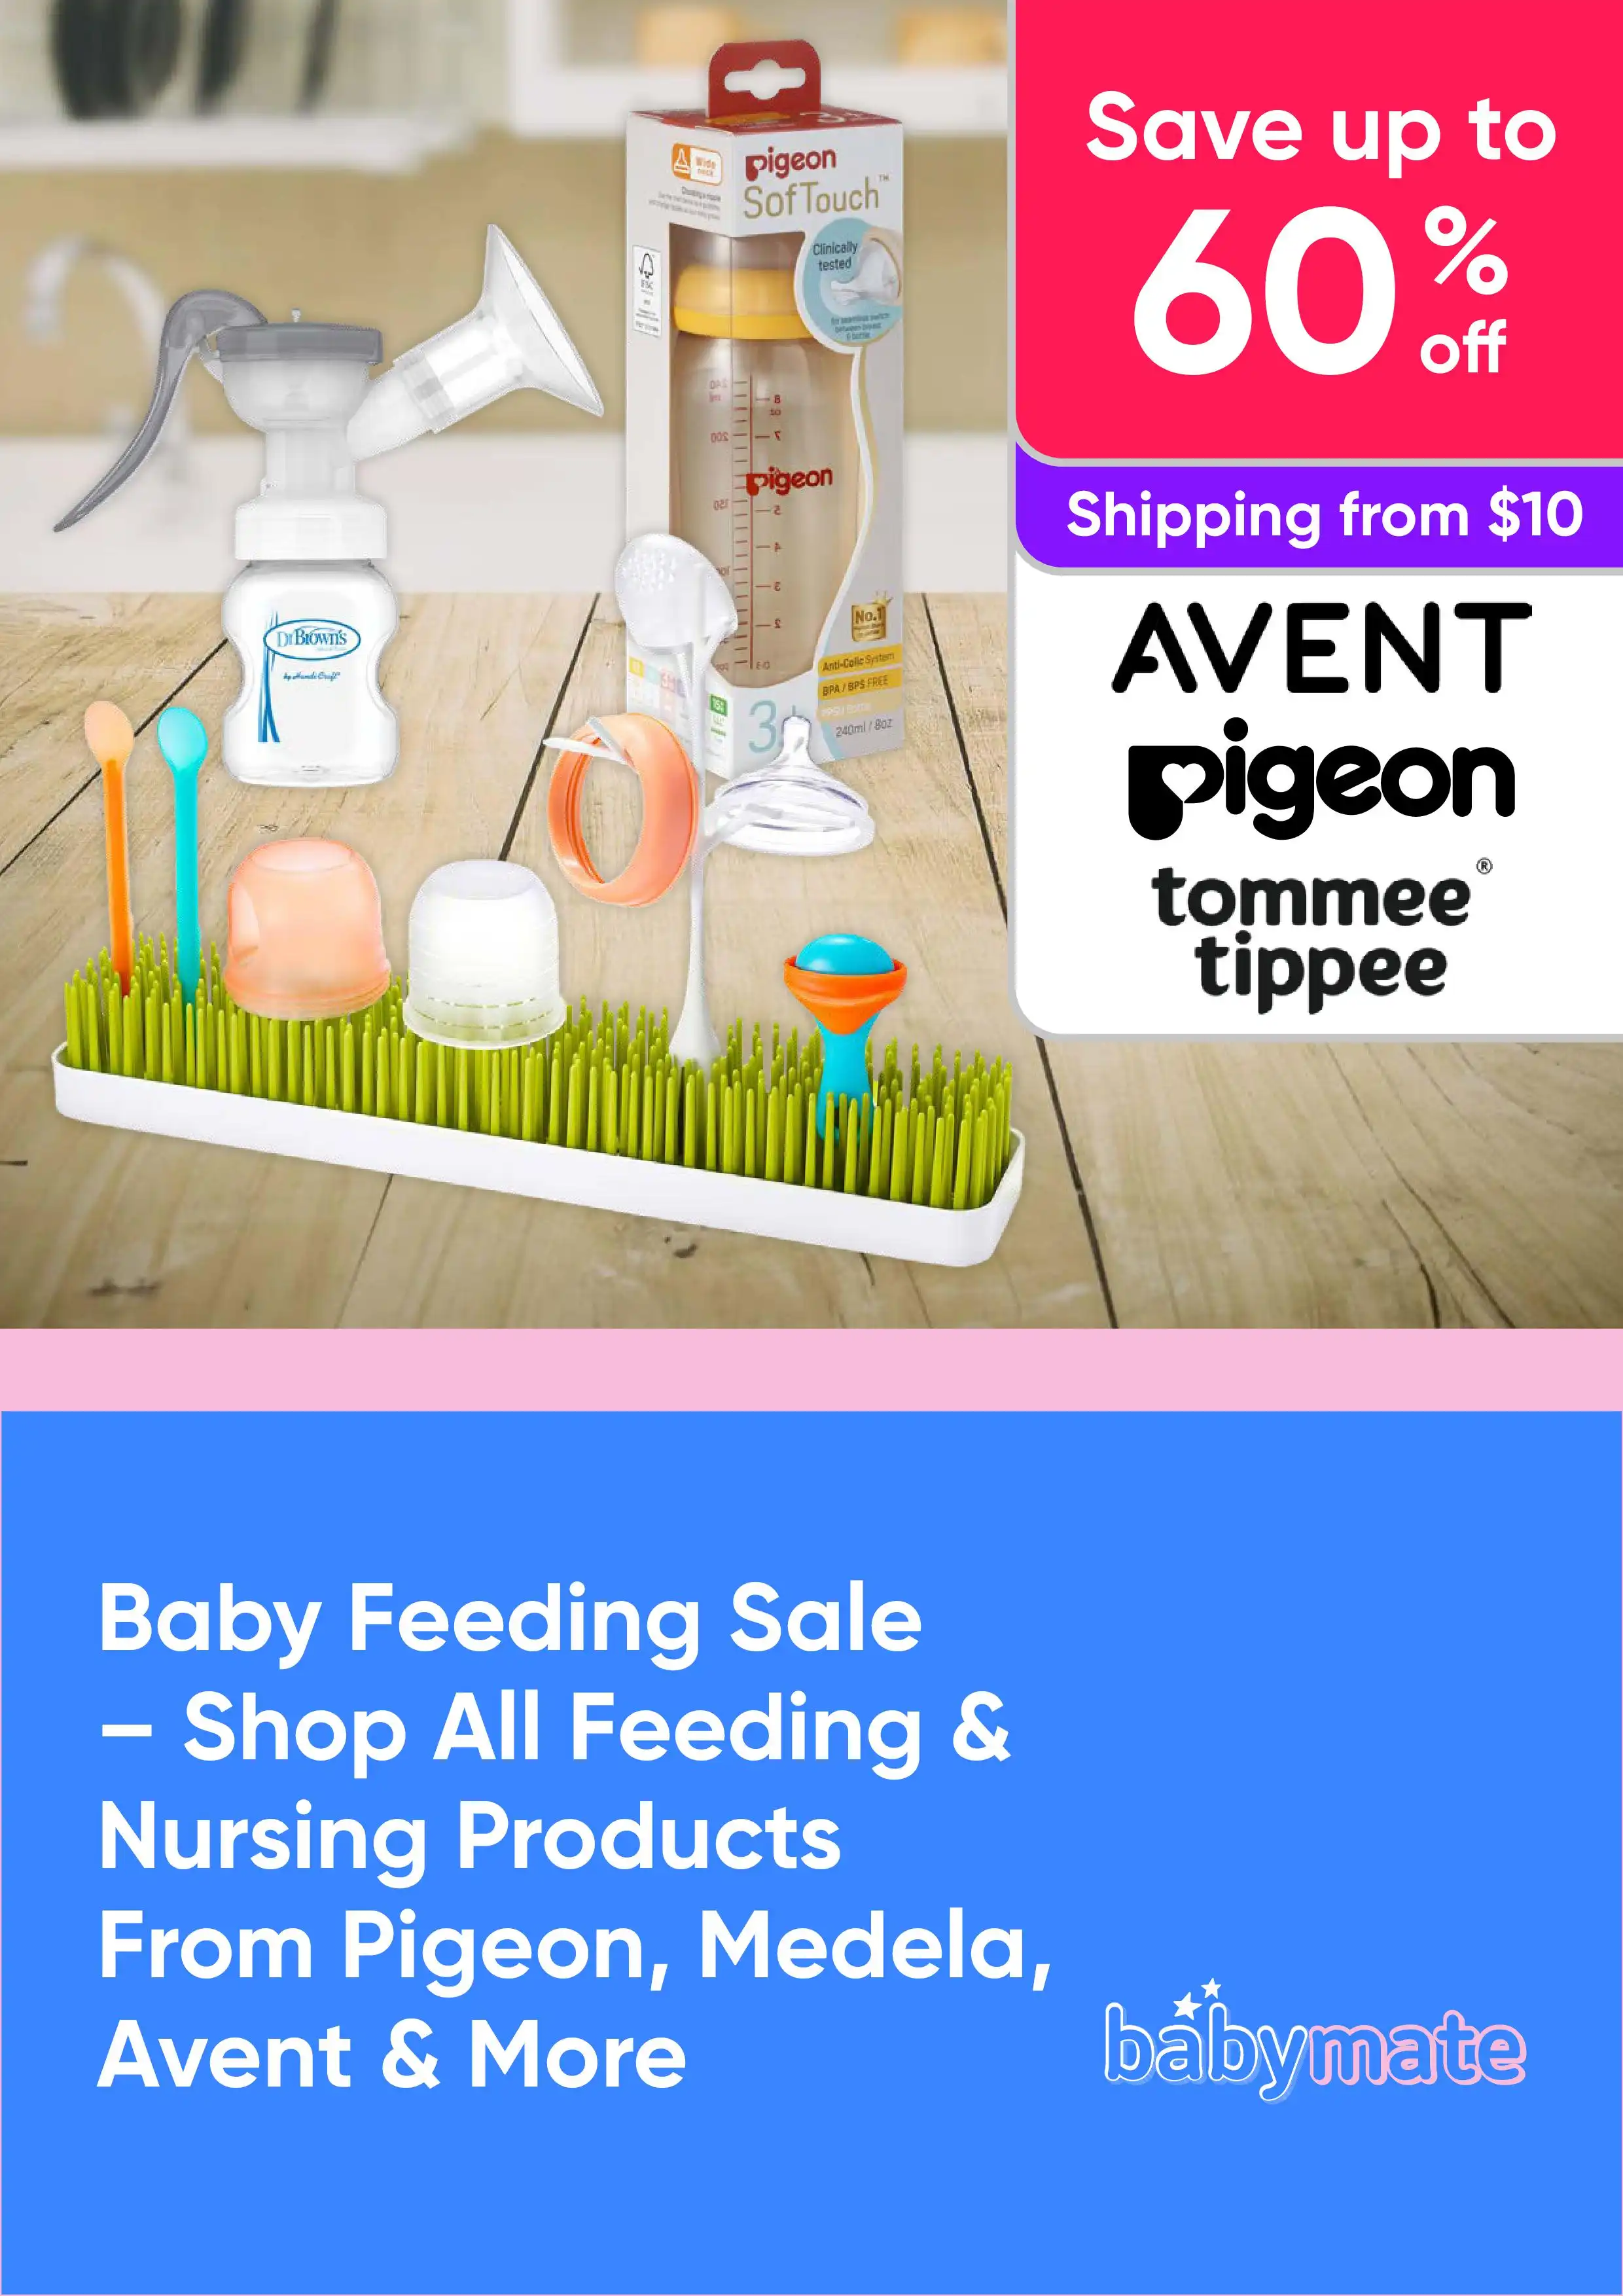 Baby Feeding Sale - Save Up to 60% off All Feeding & Nursing Products